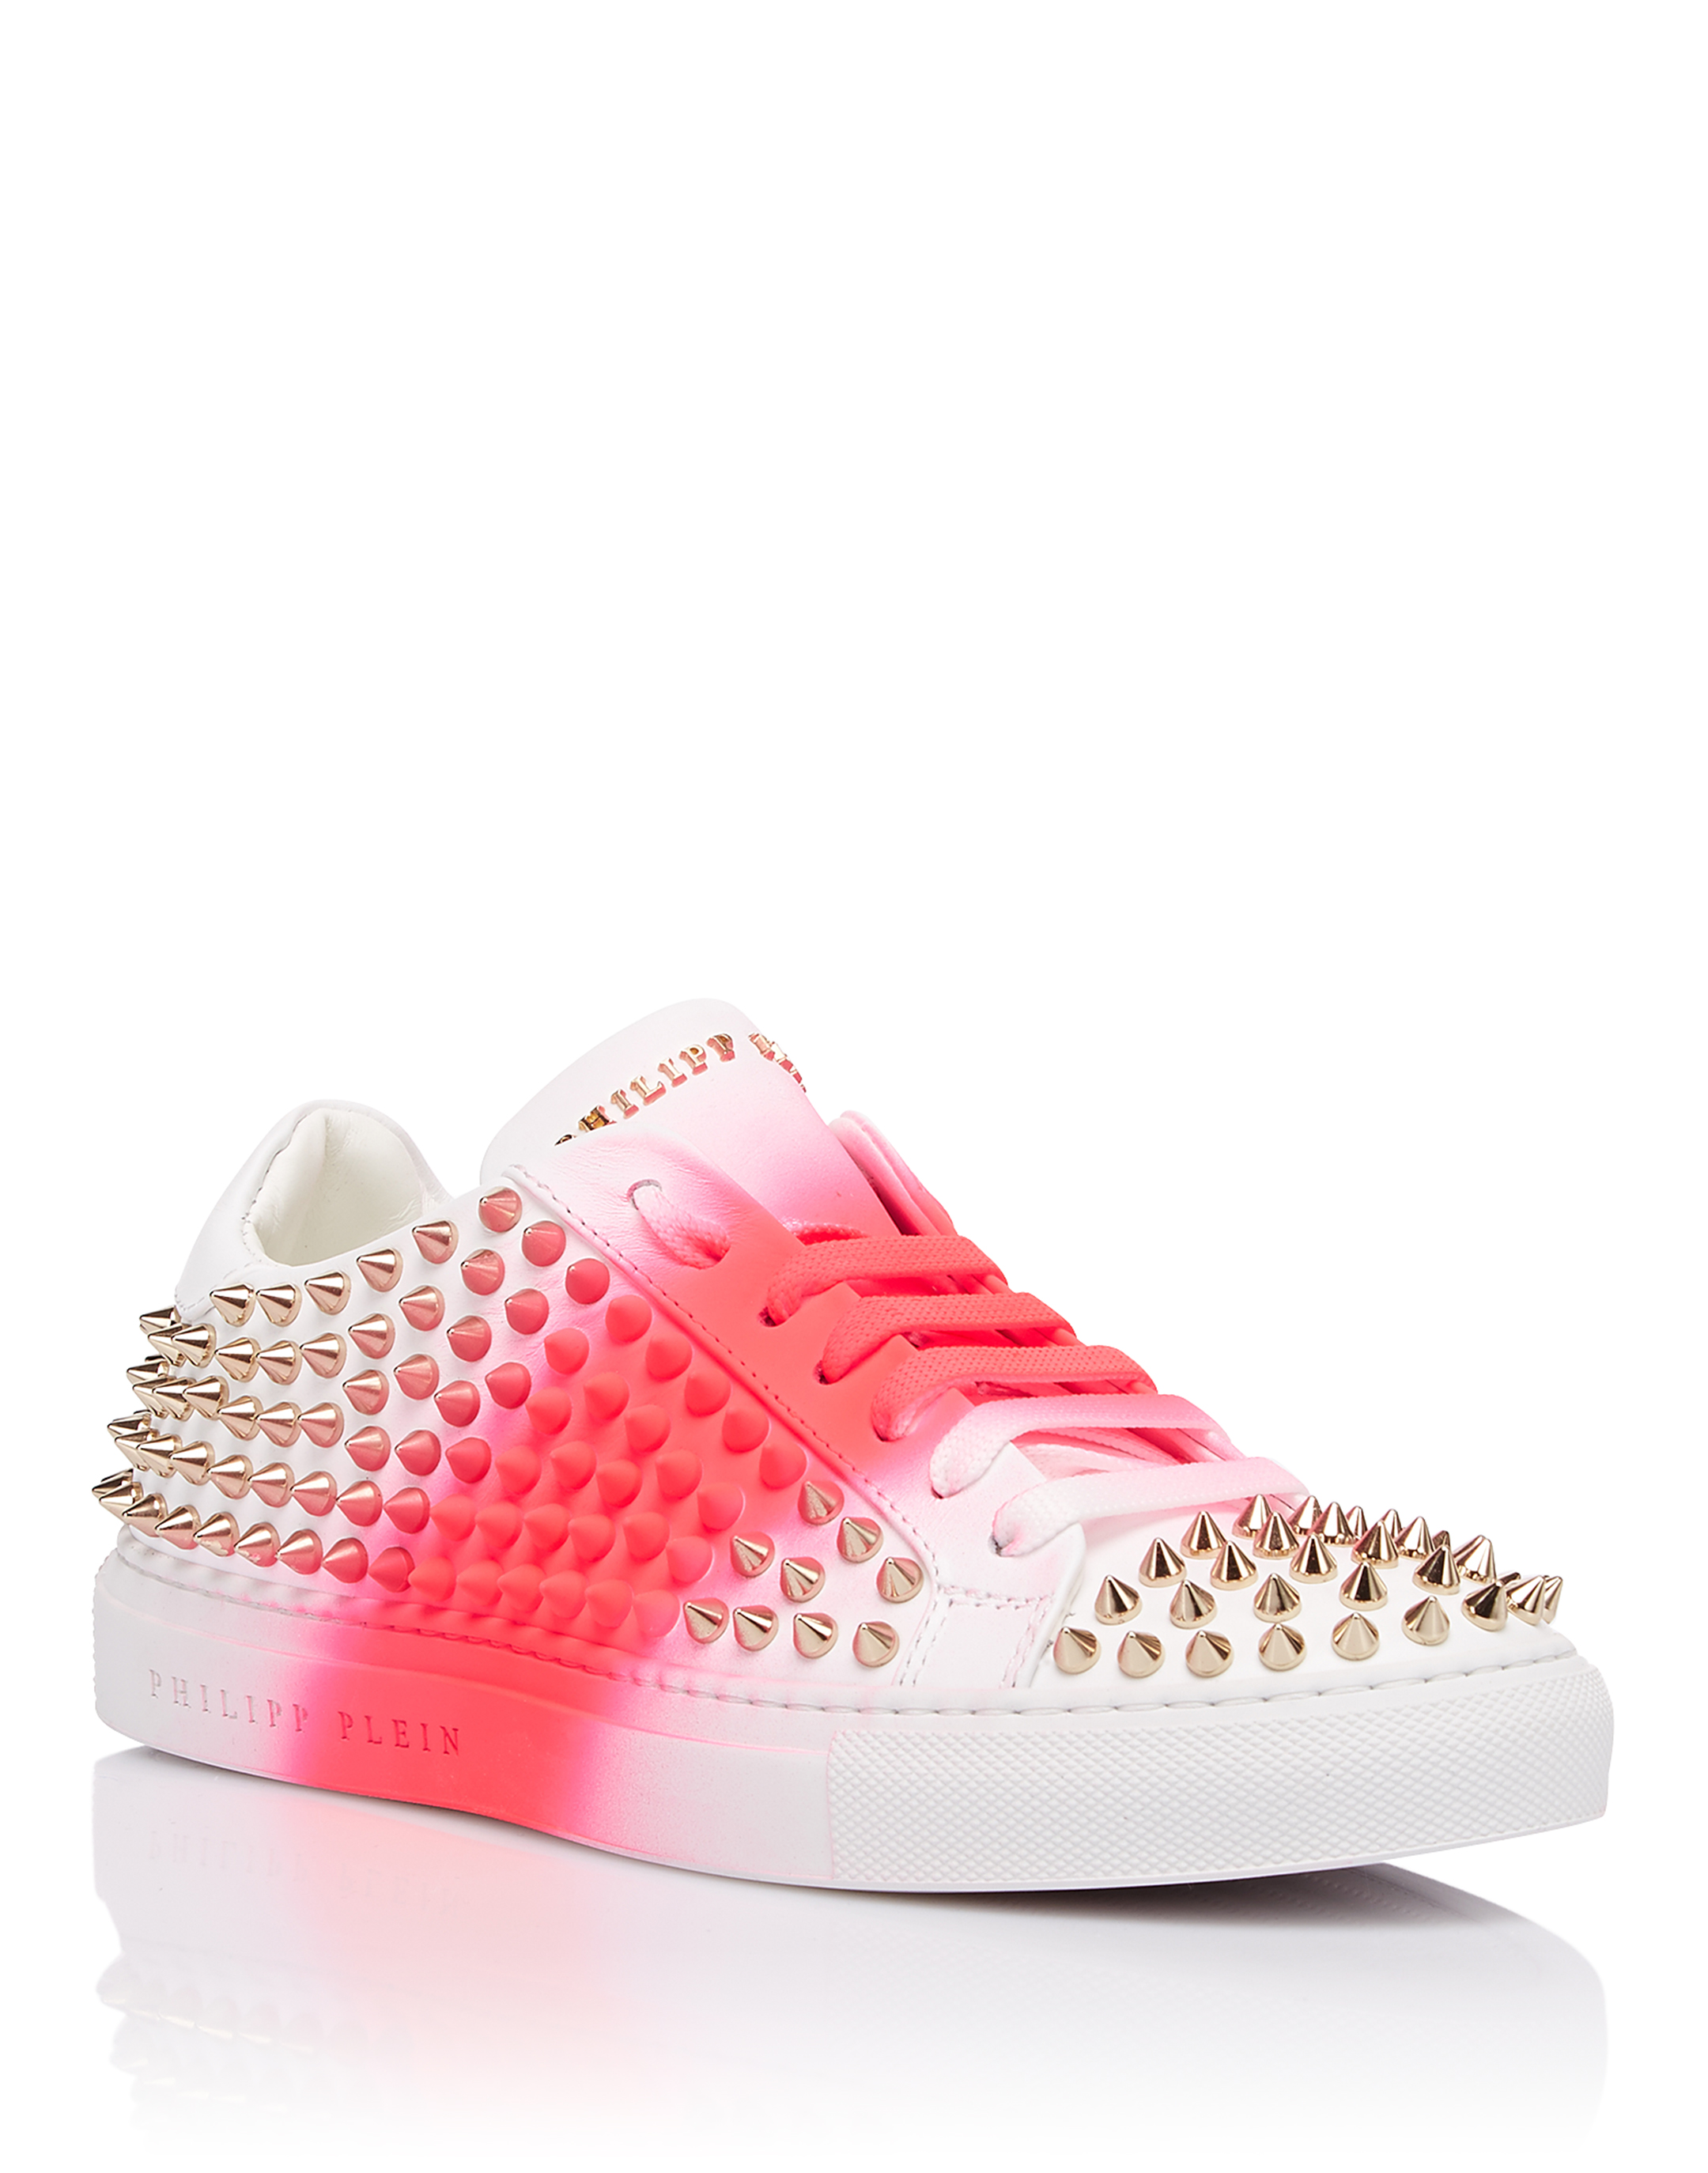 Lo-Top Sneakers "Pink me" | Philipp Plein Outlet